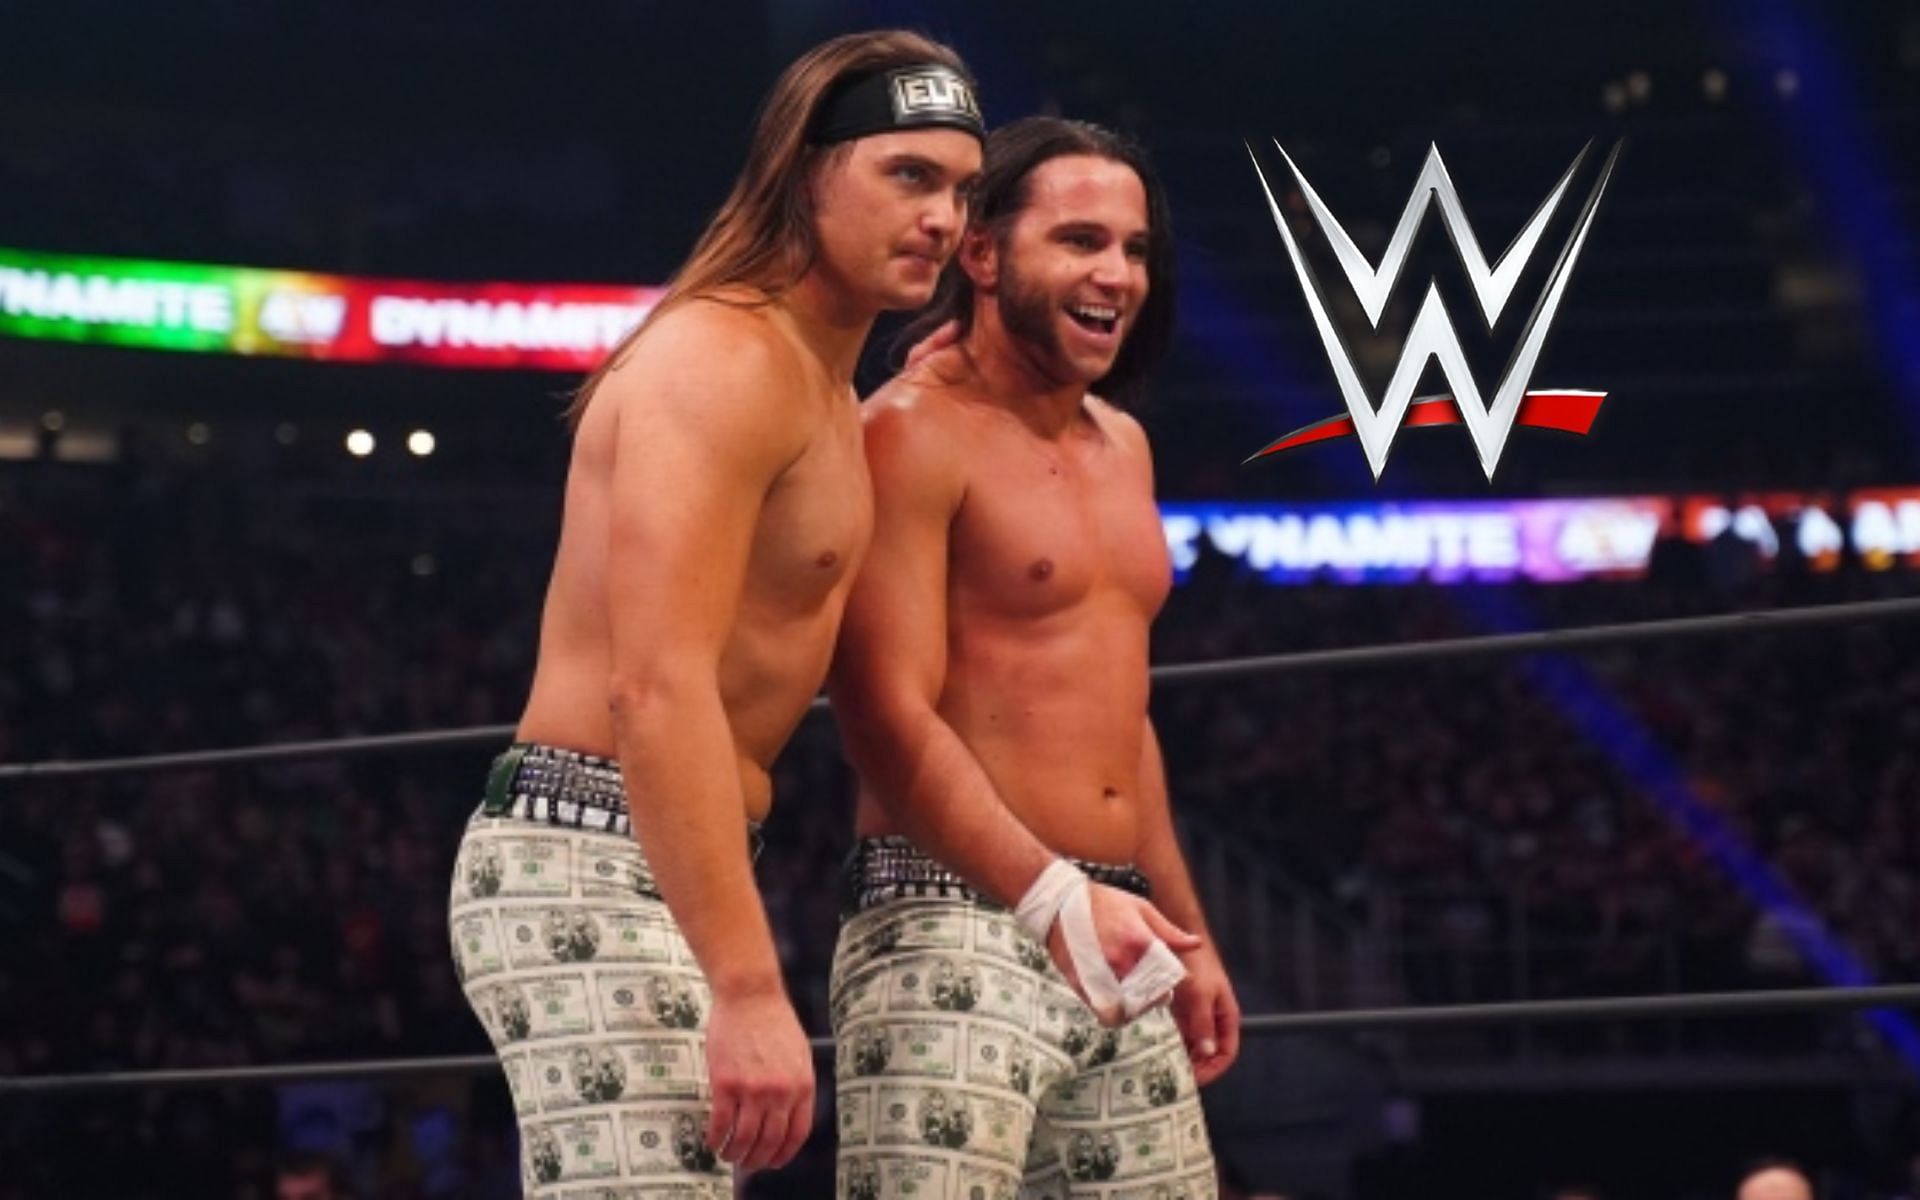 A former WWE personality shared a fond memory about AEW tag team, The Young Bucks.